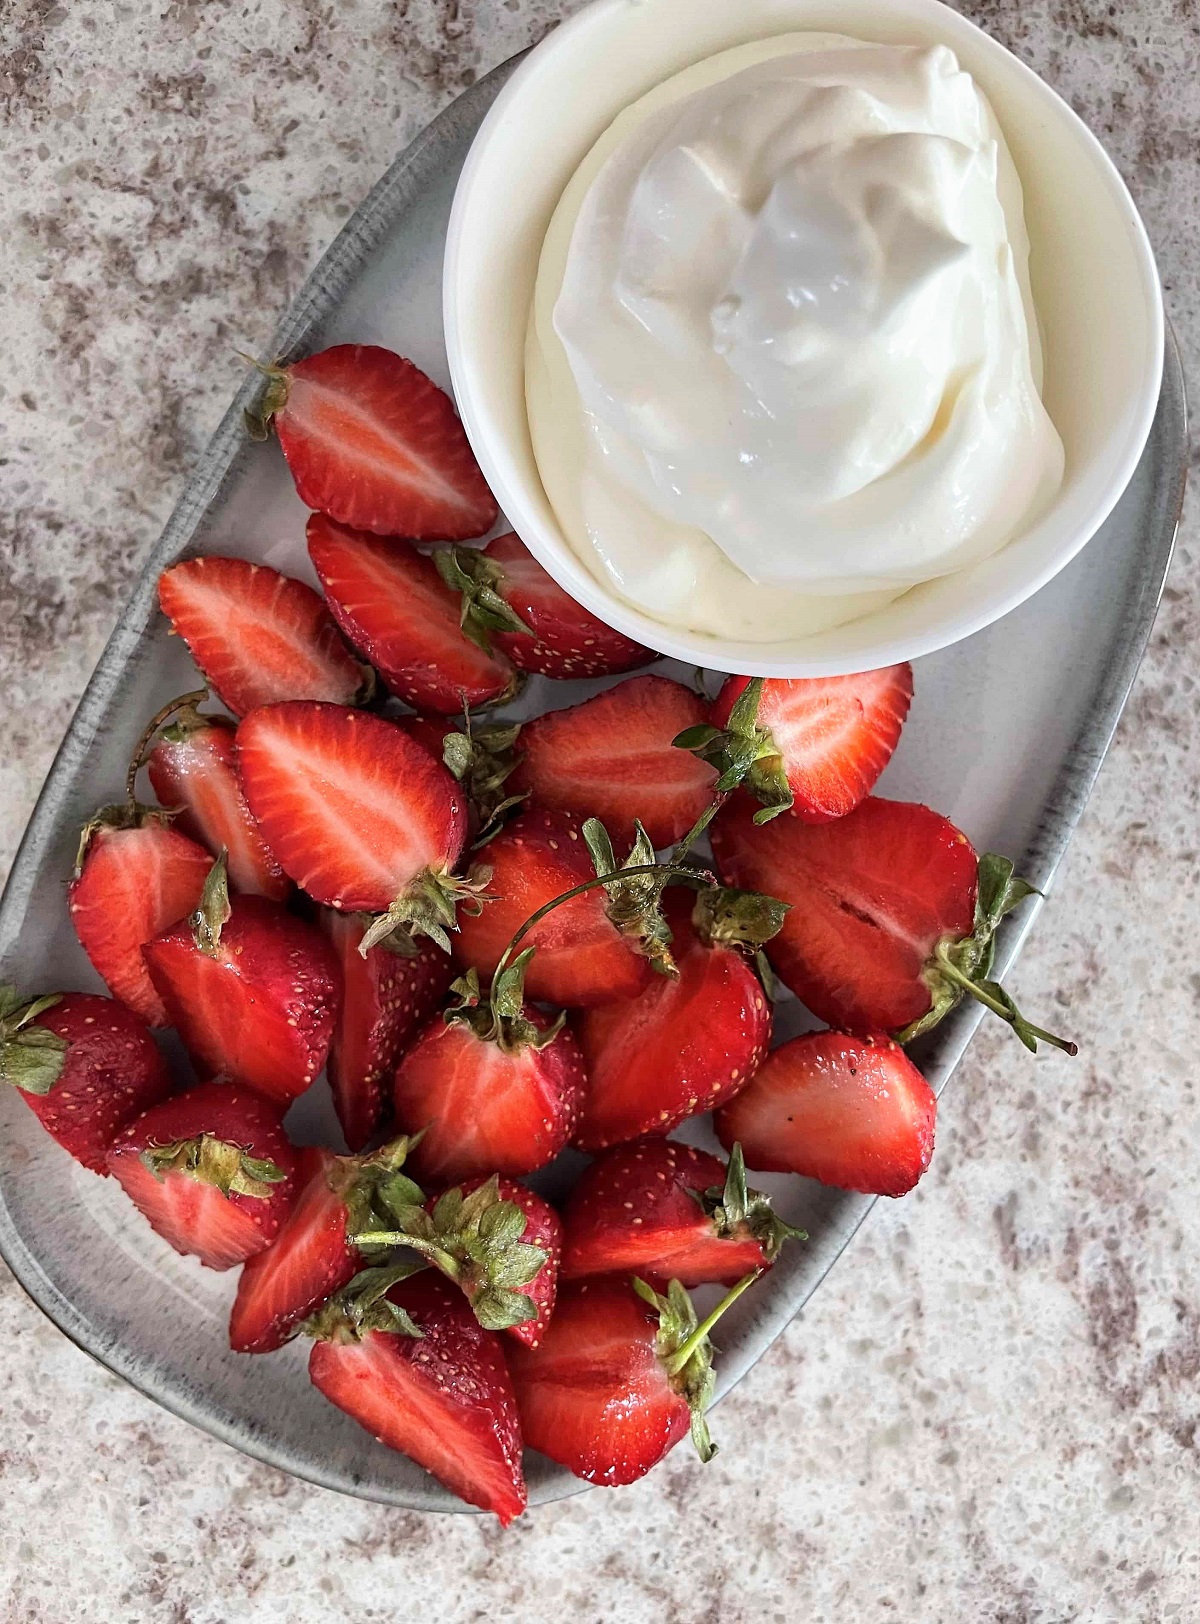 a metal tray containing sliced fresh strawberries next to a container of whipped cream.